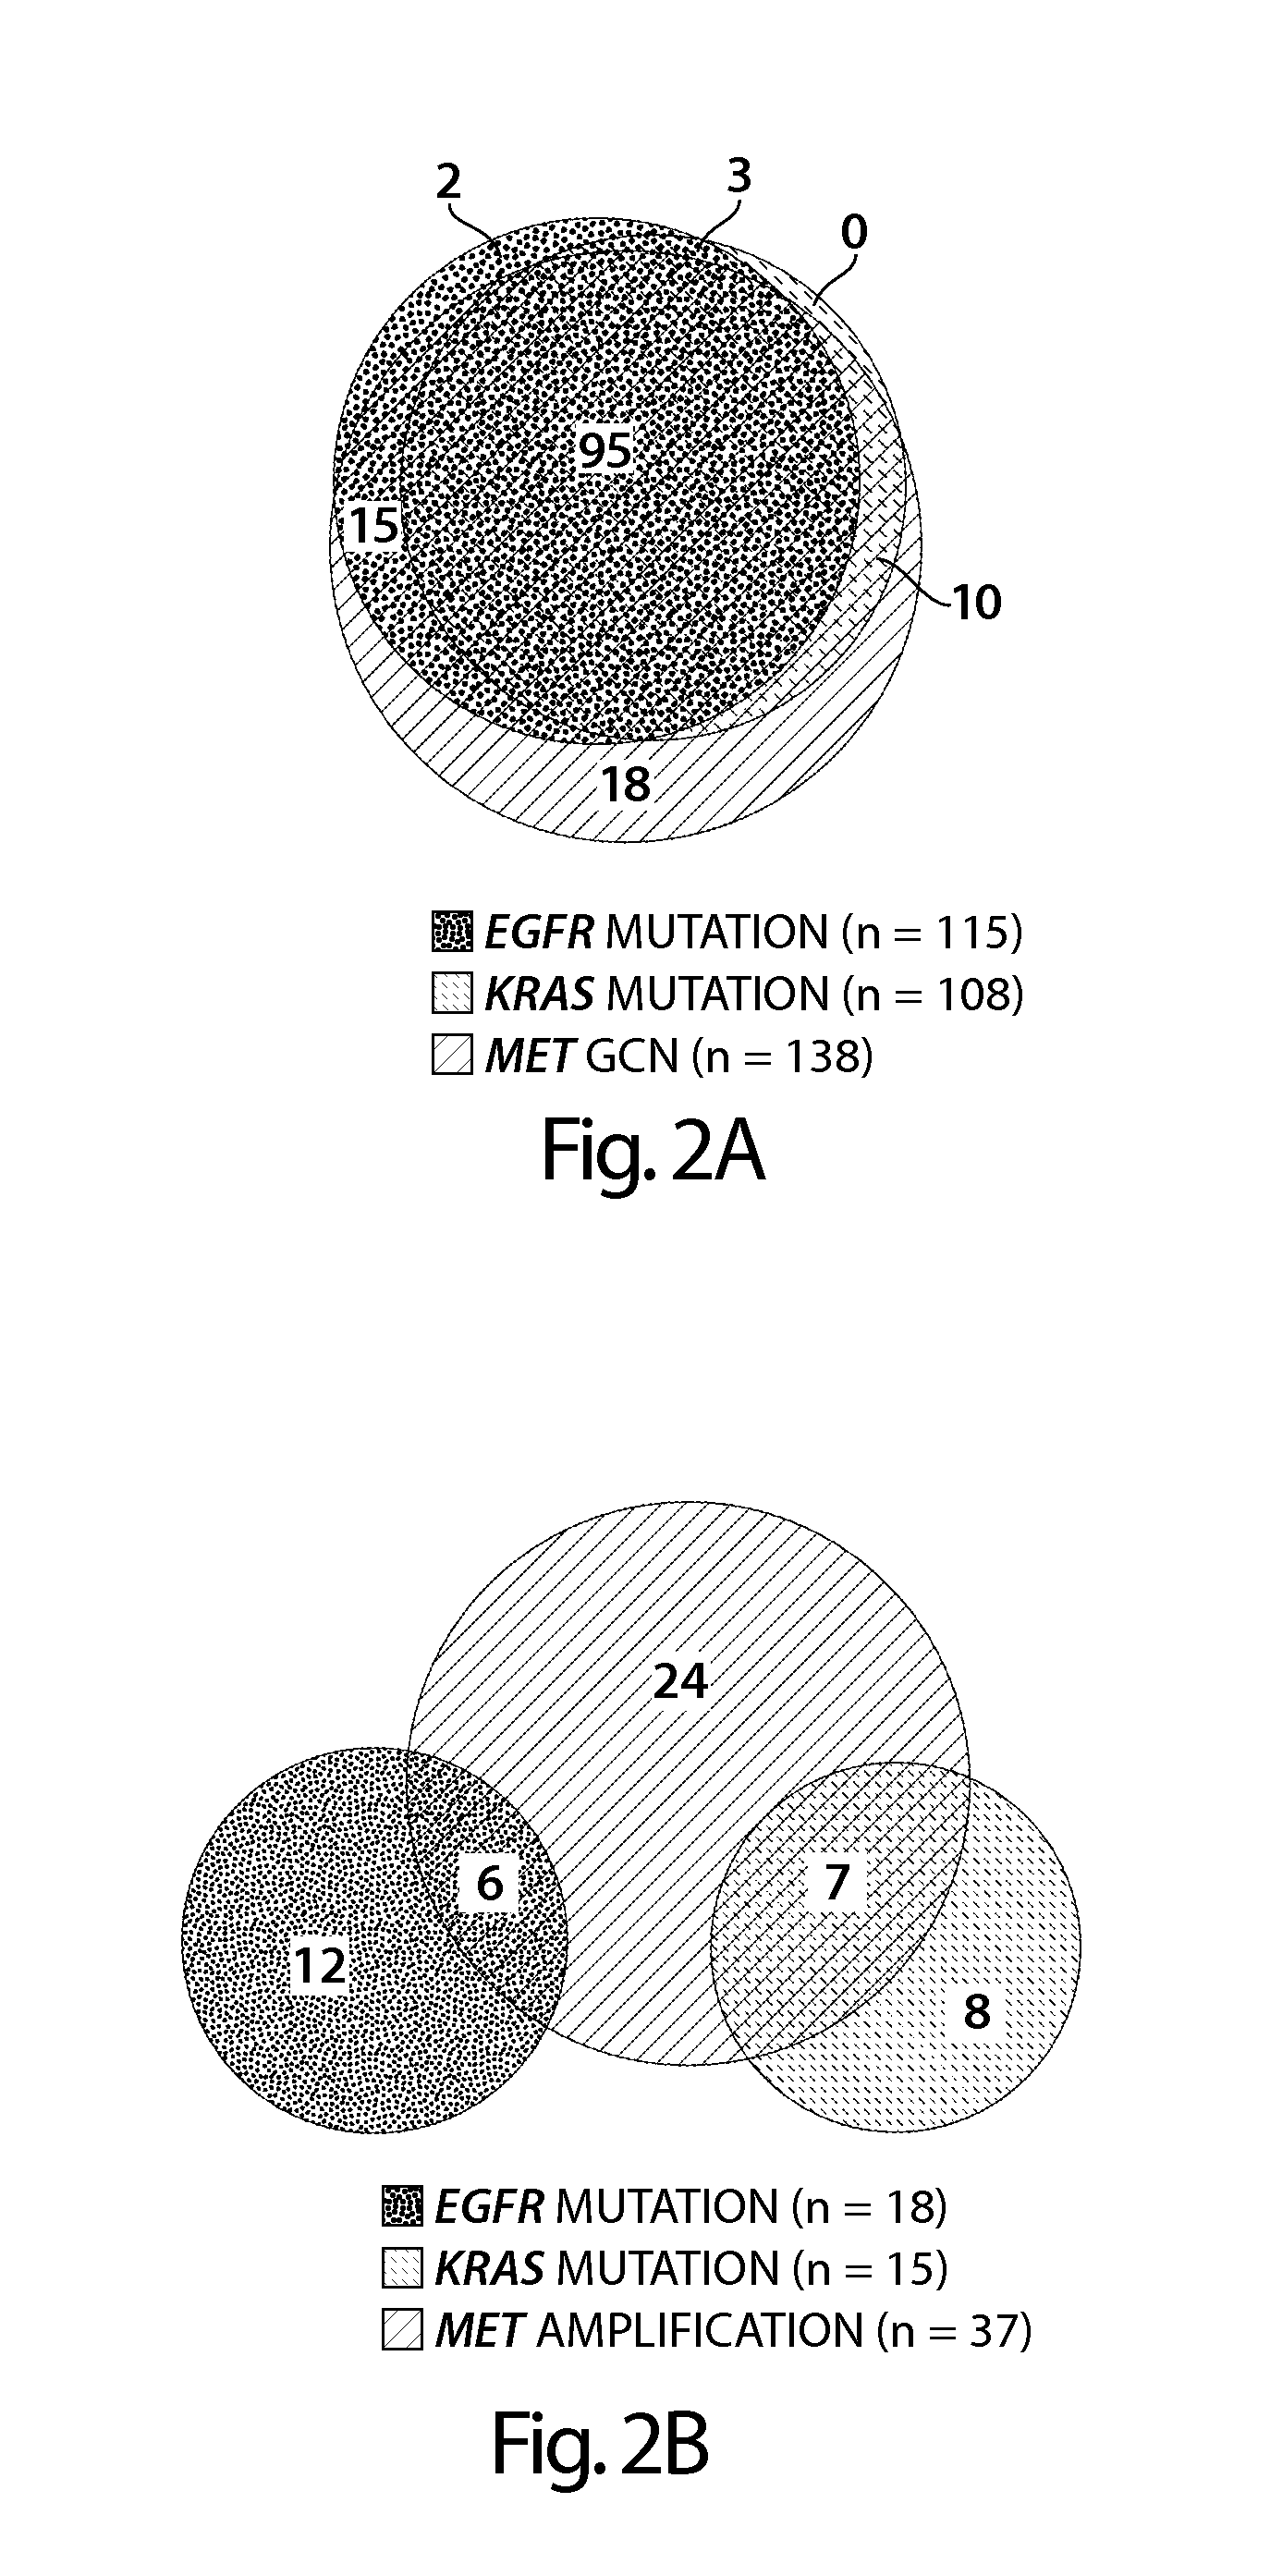 Methods for treatment of non-small cell lung cancer